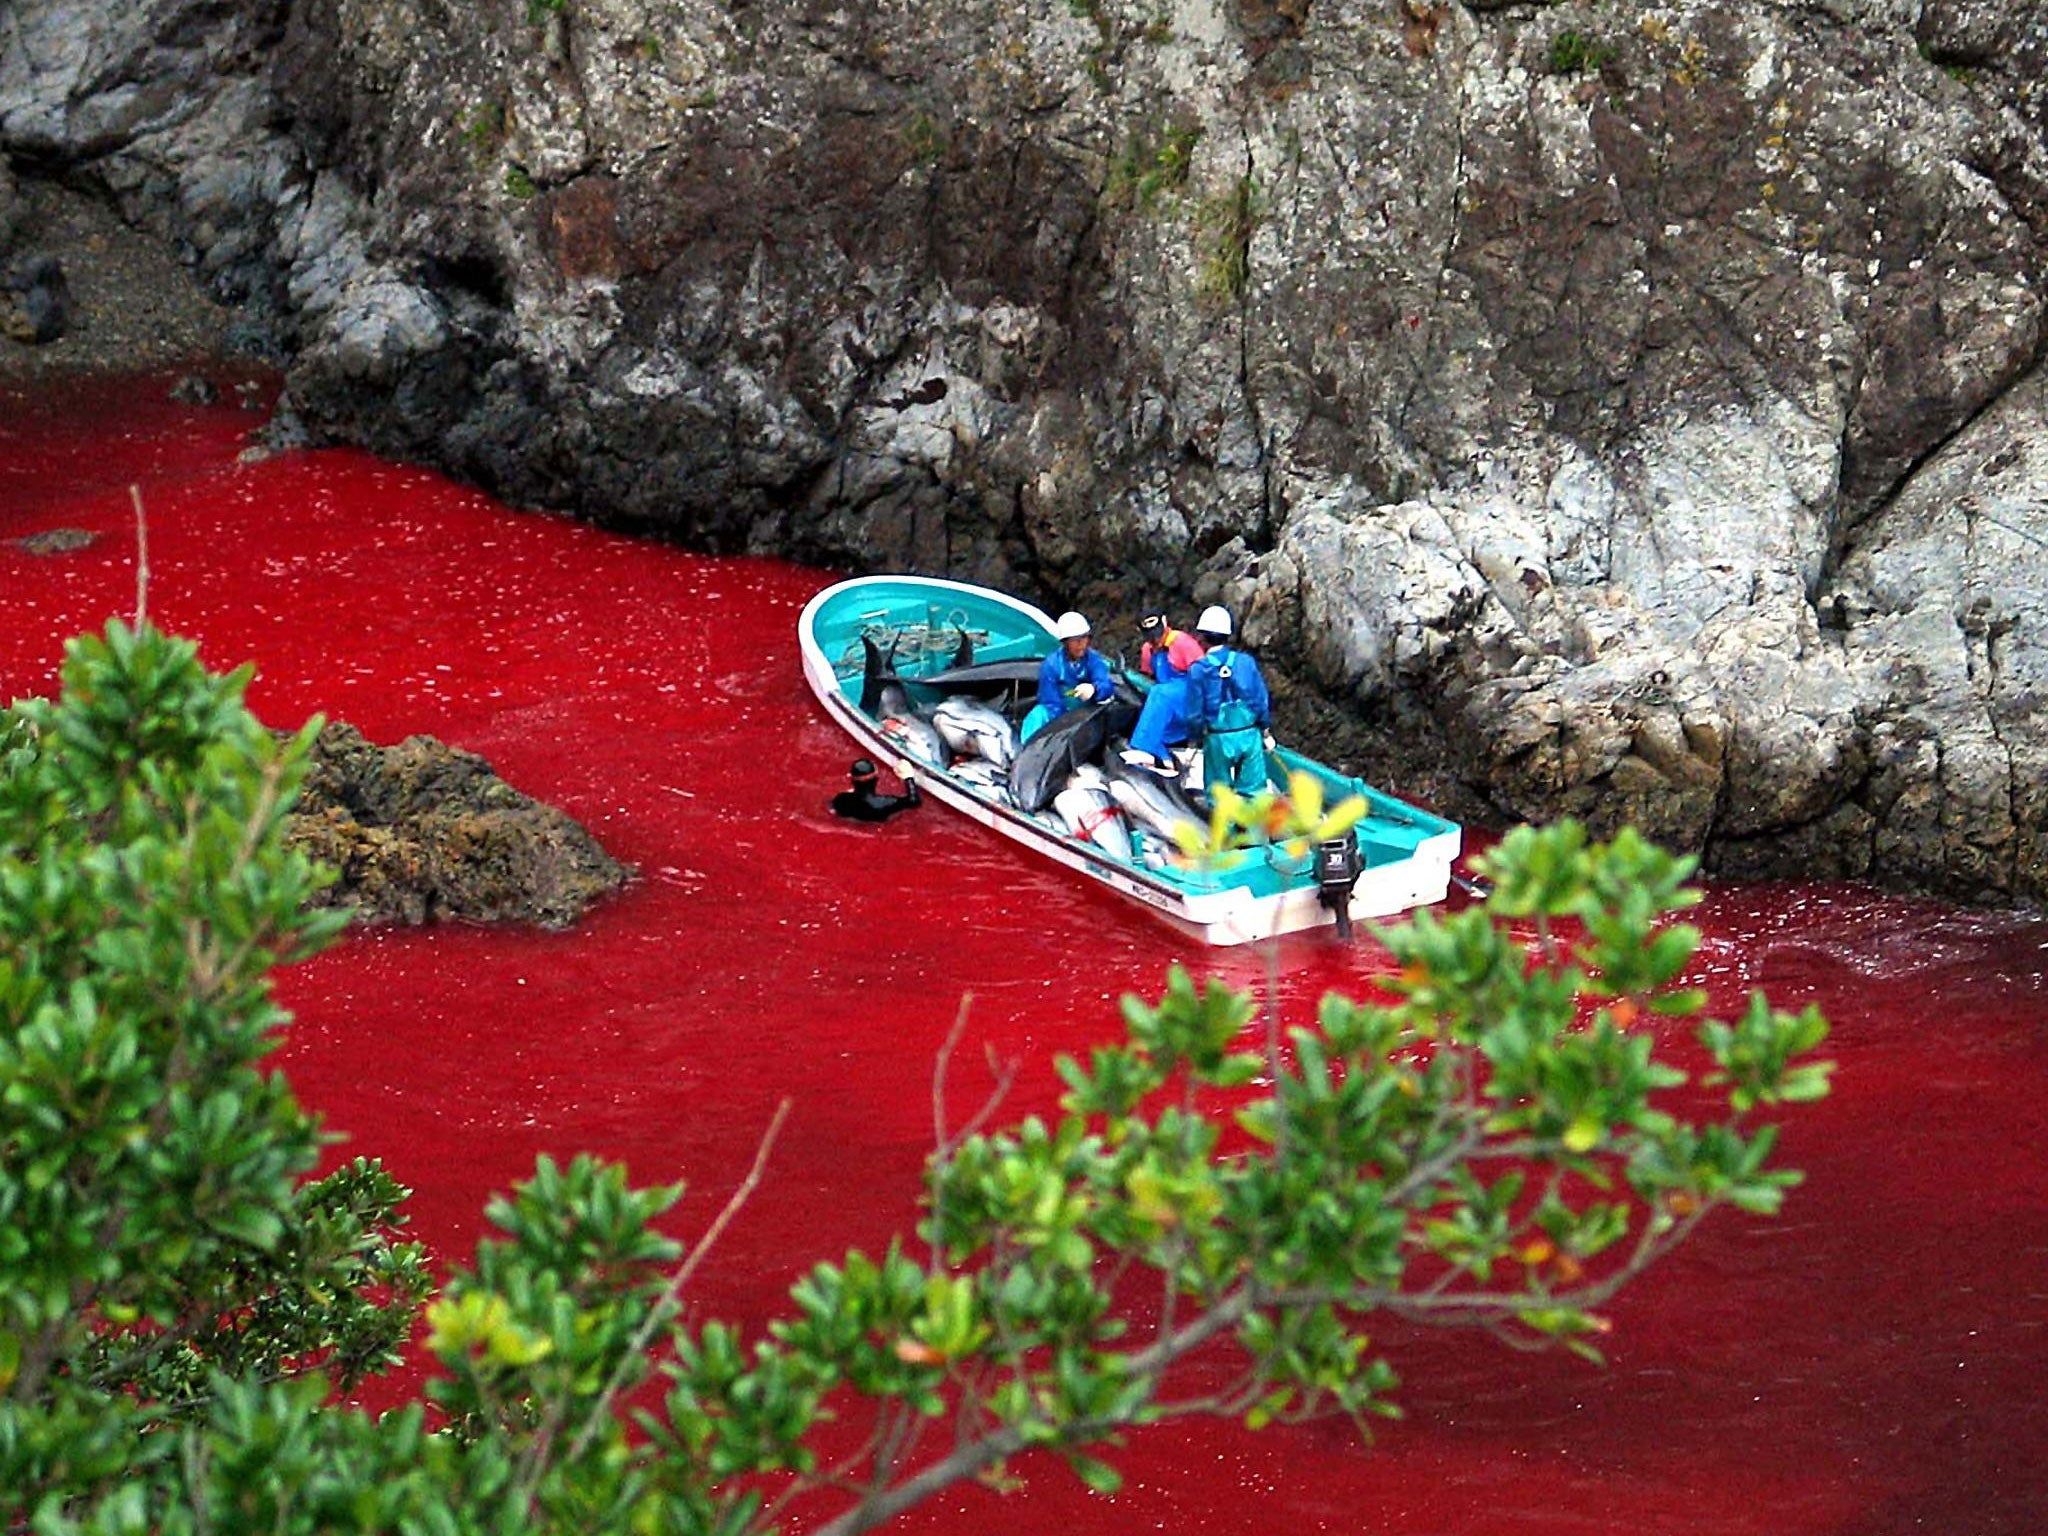 Japanese fishermen transporting slaughtered dolphins in Taiji harbour; the water of the cove is red with the blood of dead animals. Locals brand criticism of the cull 'cultural imperialism'